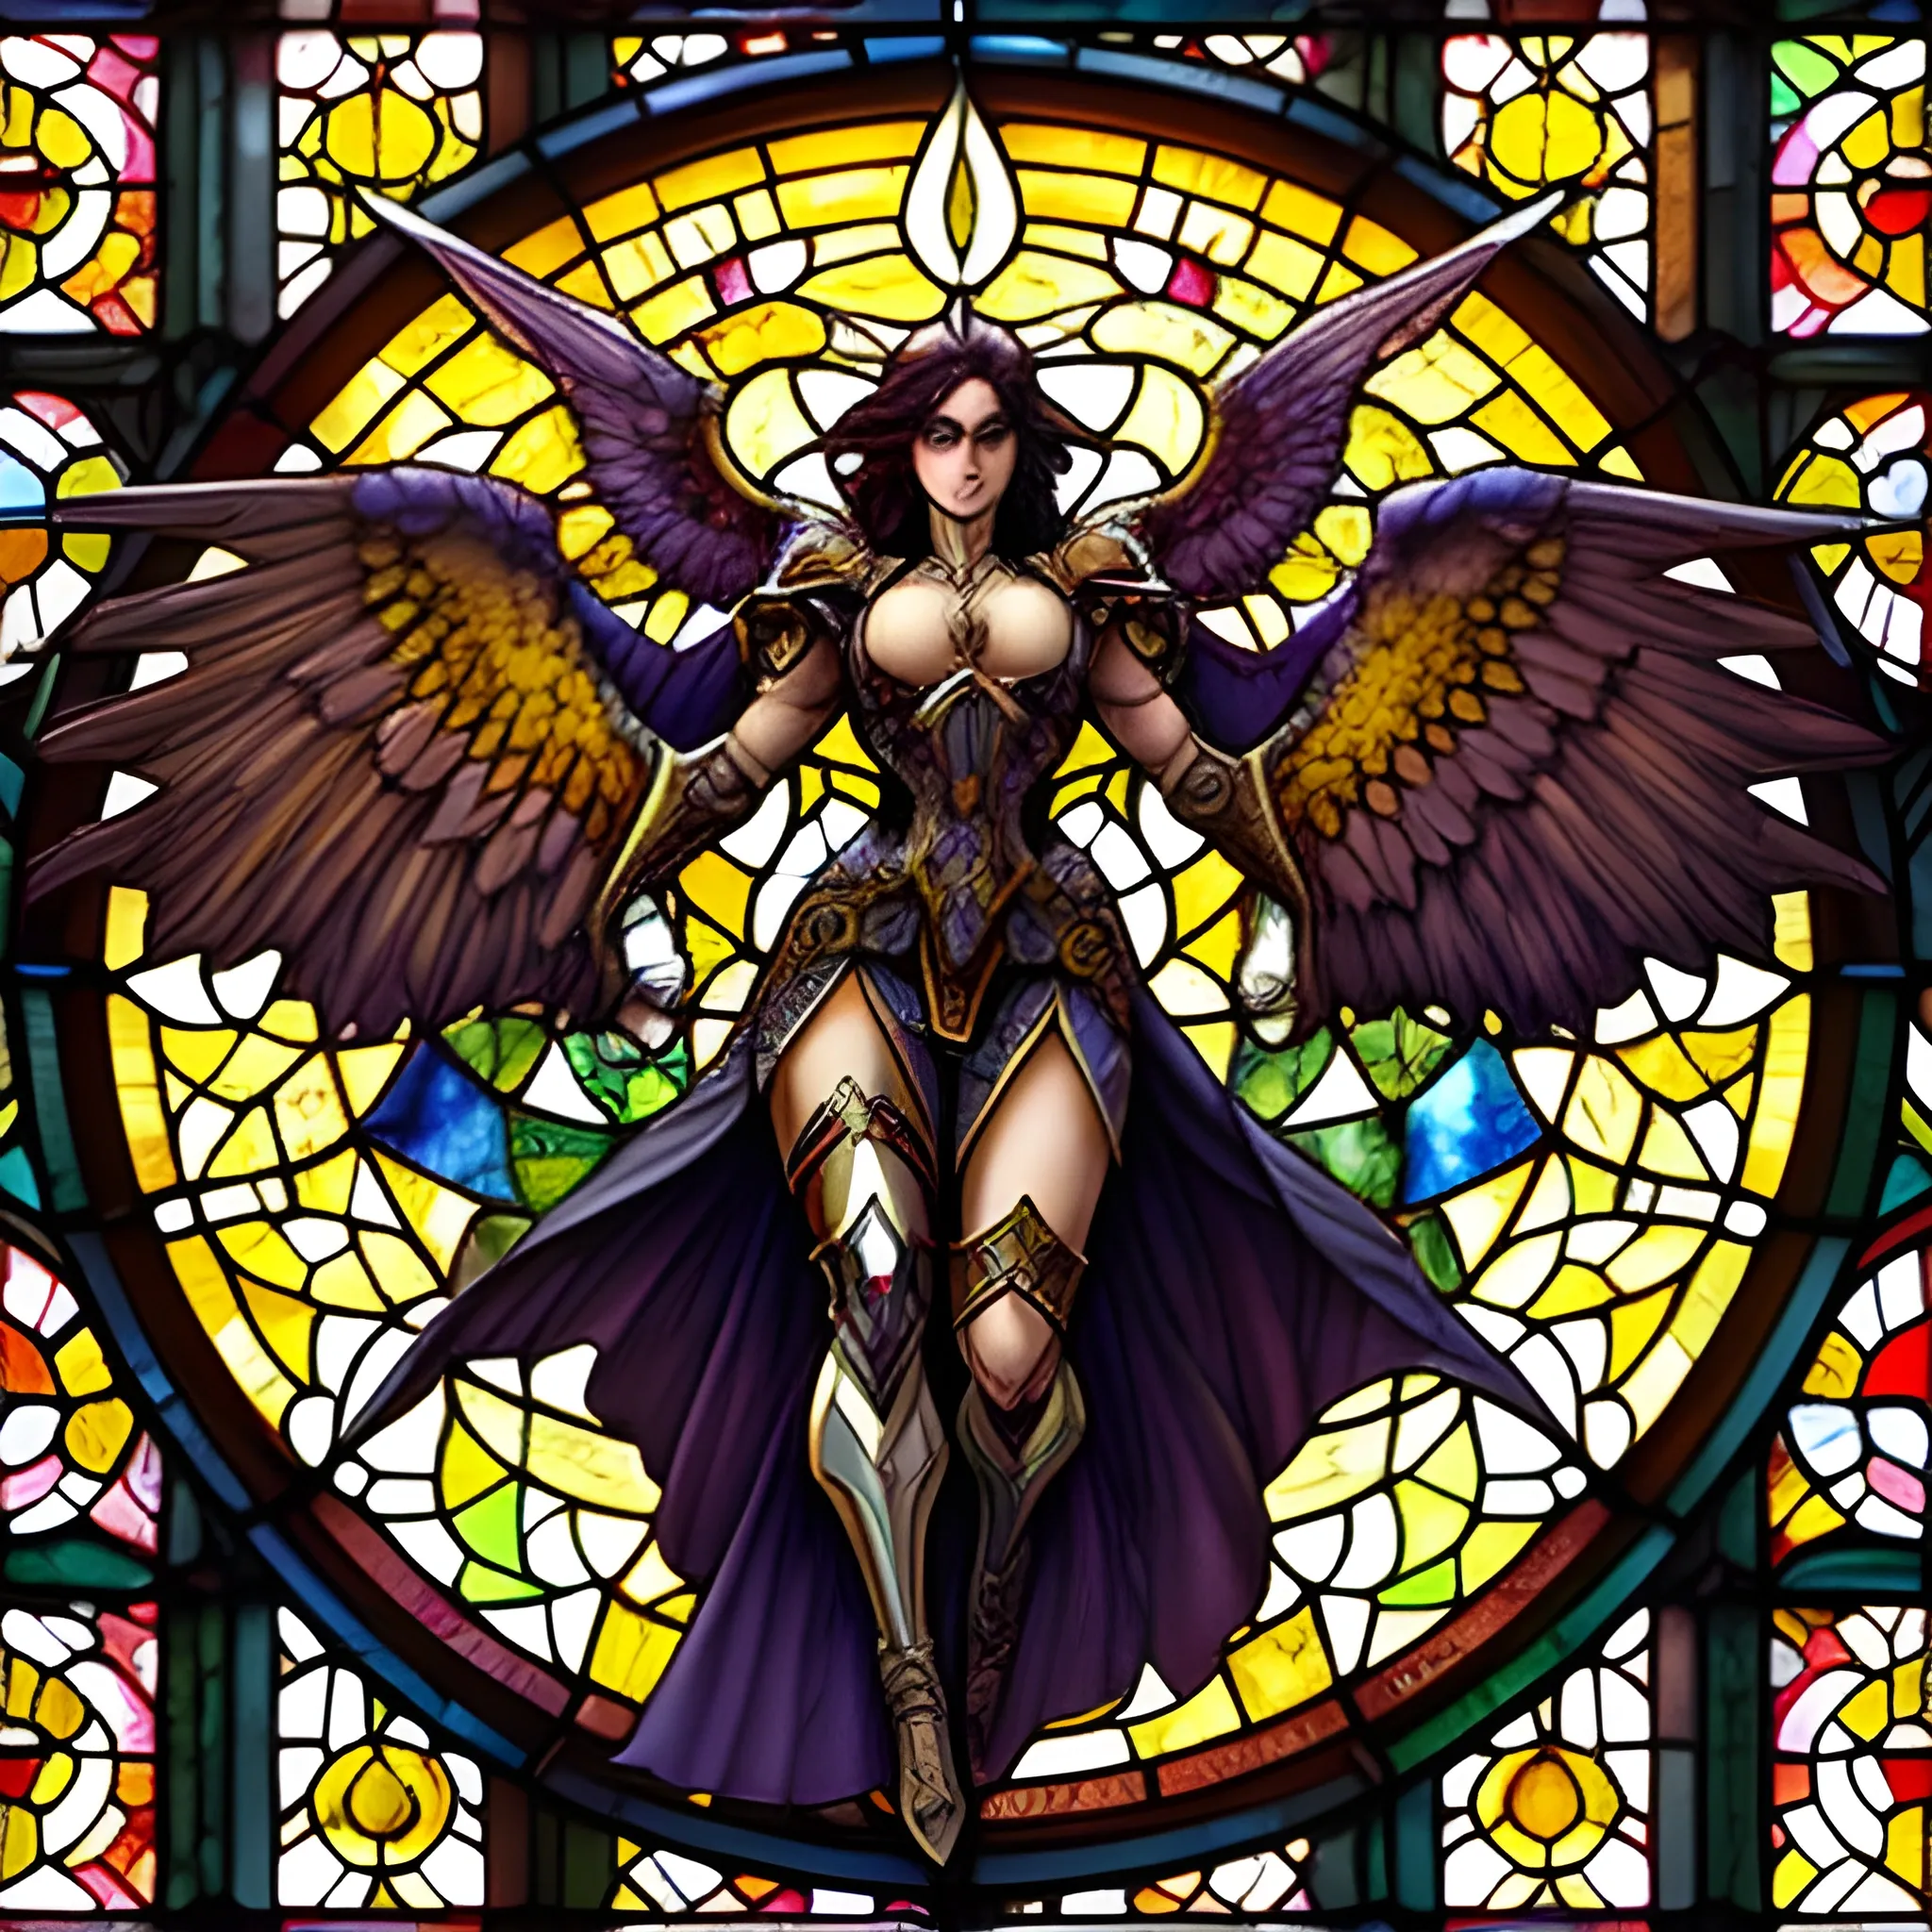 The image showcases a traditional stained glass window depicting an epic battle between an angel and a demon. The angel is portrayed with majestic, feathered wings and a halo, symbolizing purity and divinity. In contrast, the demon is characterized by dark, bat-like wings and a menacing stance, representing darkness and malevolence. They are engaged in a dramatic sword fight, at the center of which is a bright burst of light, possibly indicating the clashing of their weapons.The stained glass window is intricately detailed, with a rich palette of colors. The upper portion of the window displays symmetrical designs with a variety of vibrant colors that resemble flames, suggesting the intensity of the heavenly battle. Below the figures, the chaos of battle continues with a depiction of numerous human figures engaged in their own struggle, adding to the scene's dynamic nature.The overall composition is symmetrical and balanced, with the angel and demon positioned as mirror images of each other, reinforcing the theme of the eternal struggle between good and evil. The background of the window is a complex array of cloud-like formations, providing a sense of depth and movement to the celestial scene above.The lower part of the window serves as a narrative foundation, grounding the heavenly conflict in the mortal realm, perhaps implying that the outcomes of such cosmic battles have direct consequences on the human condition. The craftsmanship of the stained glass, with its leaded divisions and varying textures and hues, contributes to a sense of grandeur and historical significance. extremely psychedelic macro, dof, lsd, microscopic, diffuse lighting, fantasy, intricate, elegant, highly detailed, organic, photorealistic, digital painting, artstation, illustration, concept art, smooth, sharp focus, art by john collier and albert aublet and krenz cushart and artem demura and mucha